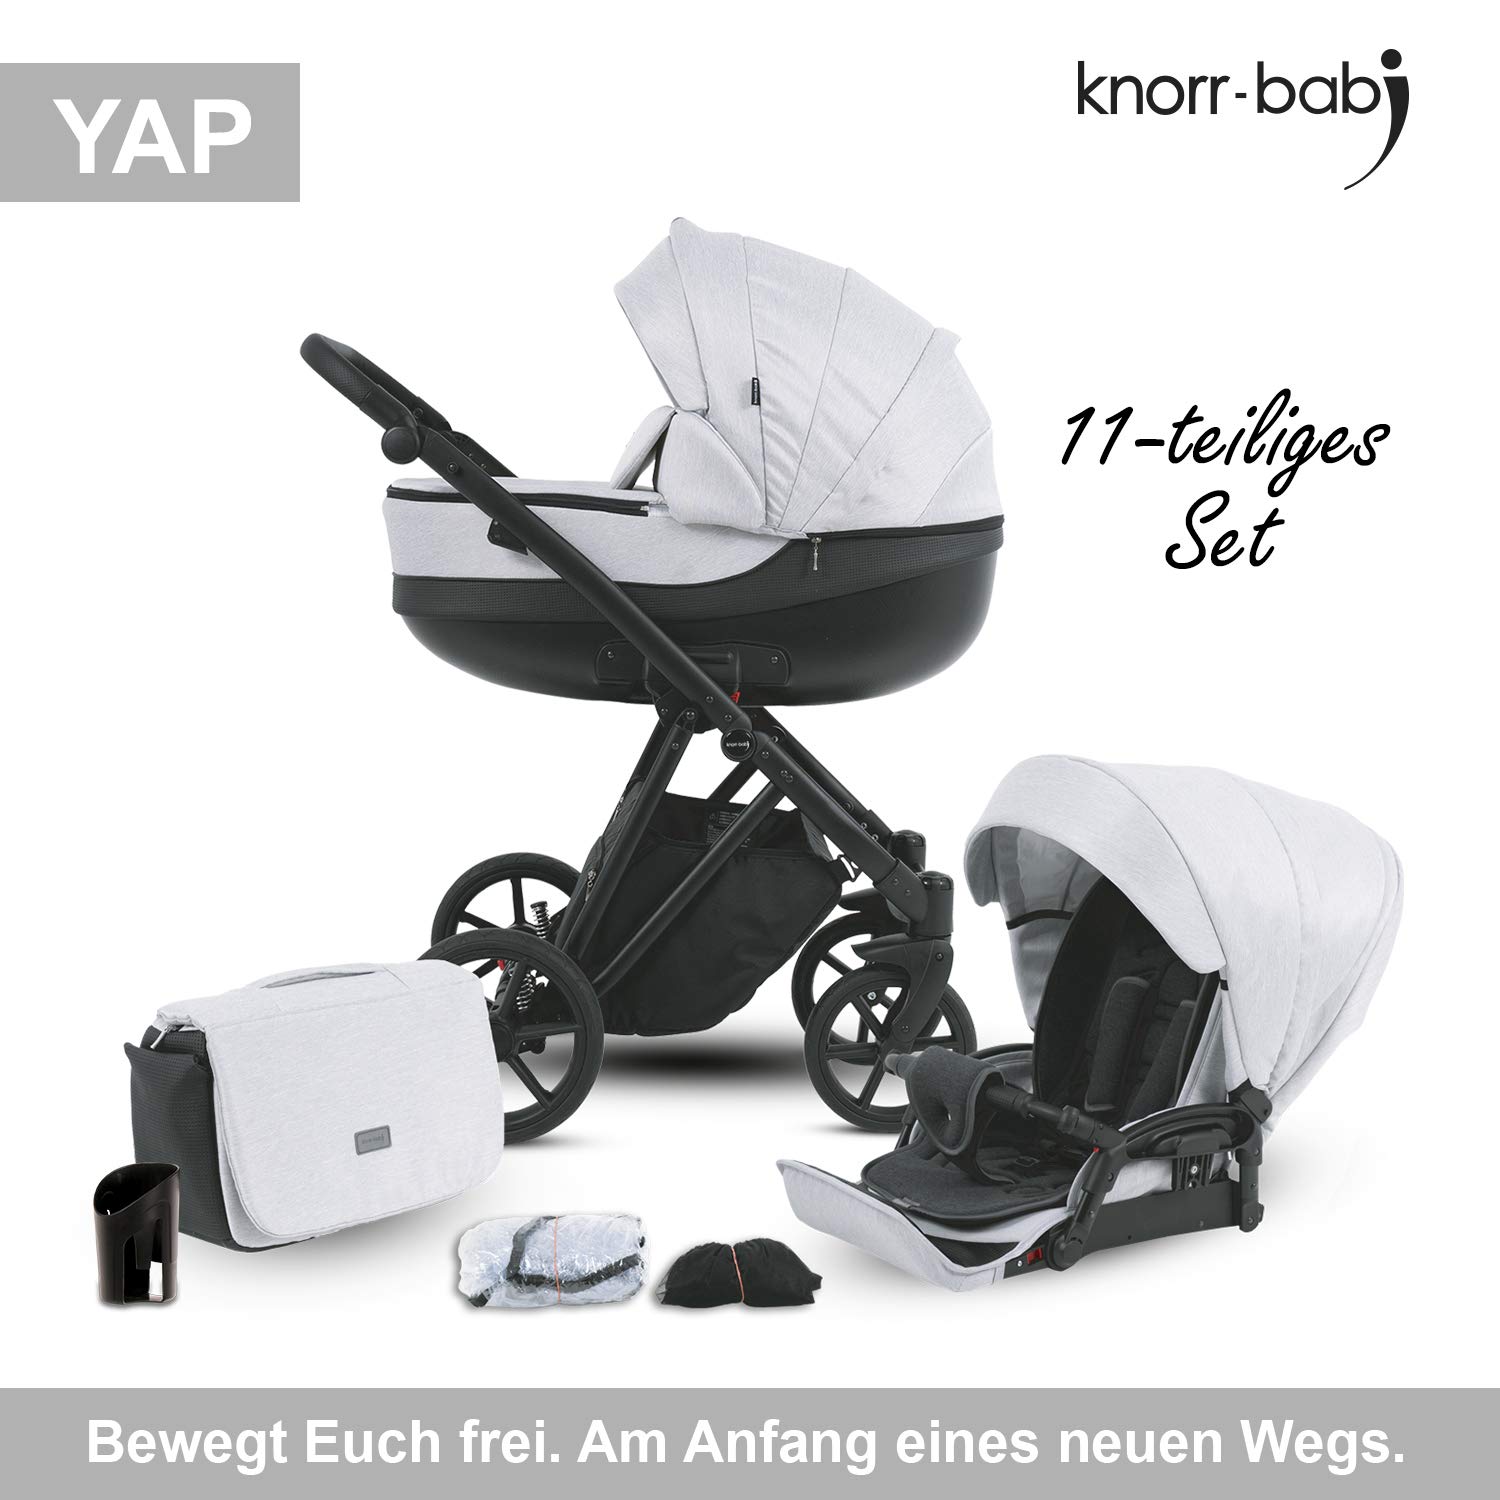 Knorr-Baby YAP Combination Pushchair